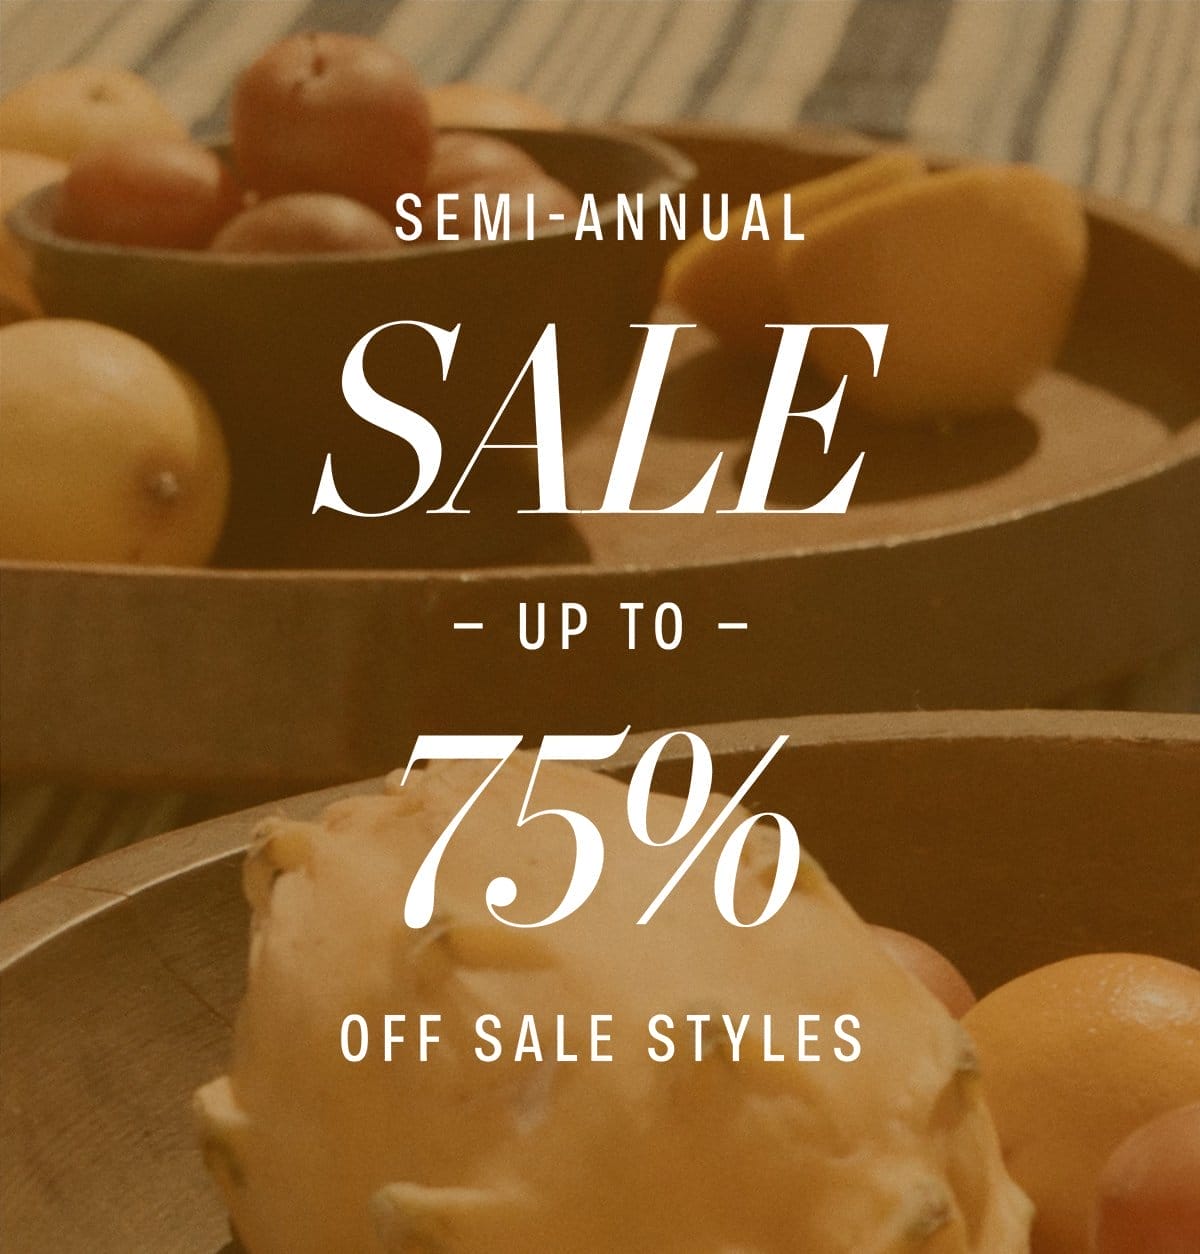 SEMI-ANNUAL SALE! UP TO 75% OFF SALE STYLES + NEW STYLES ADDED FOR A LIMITED TIME